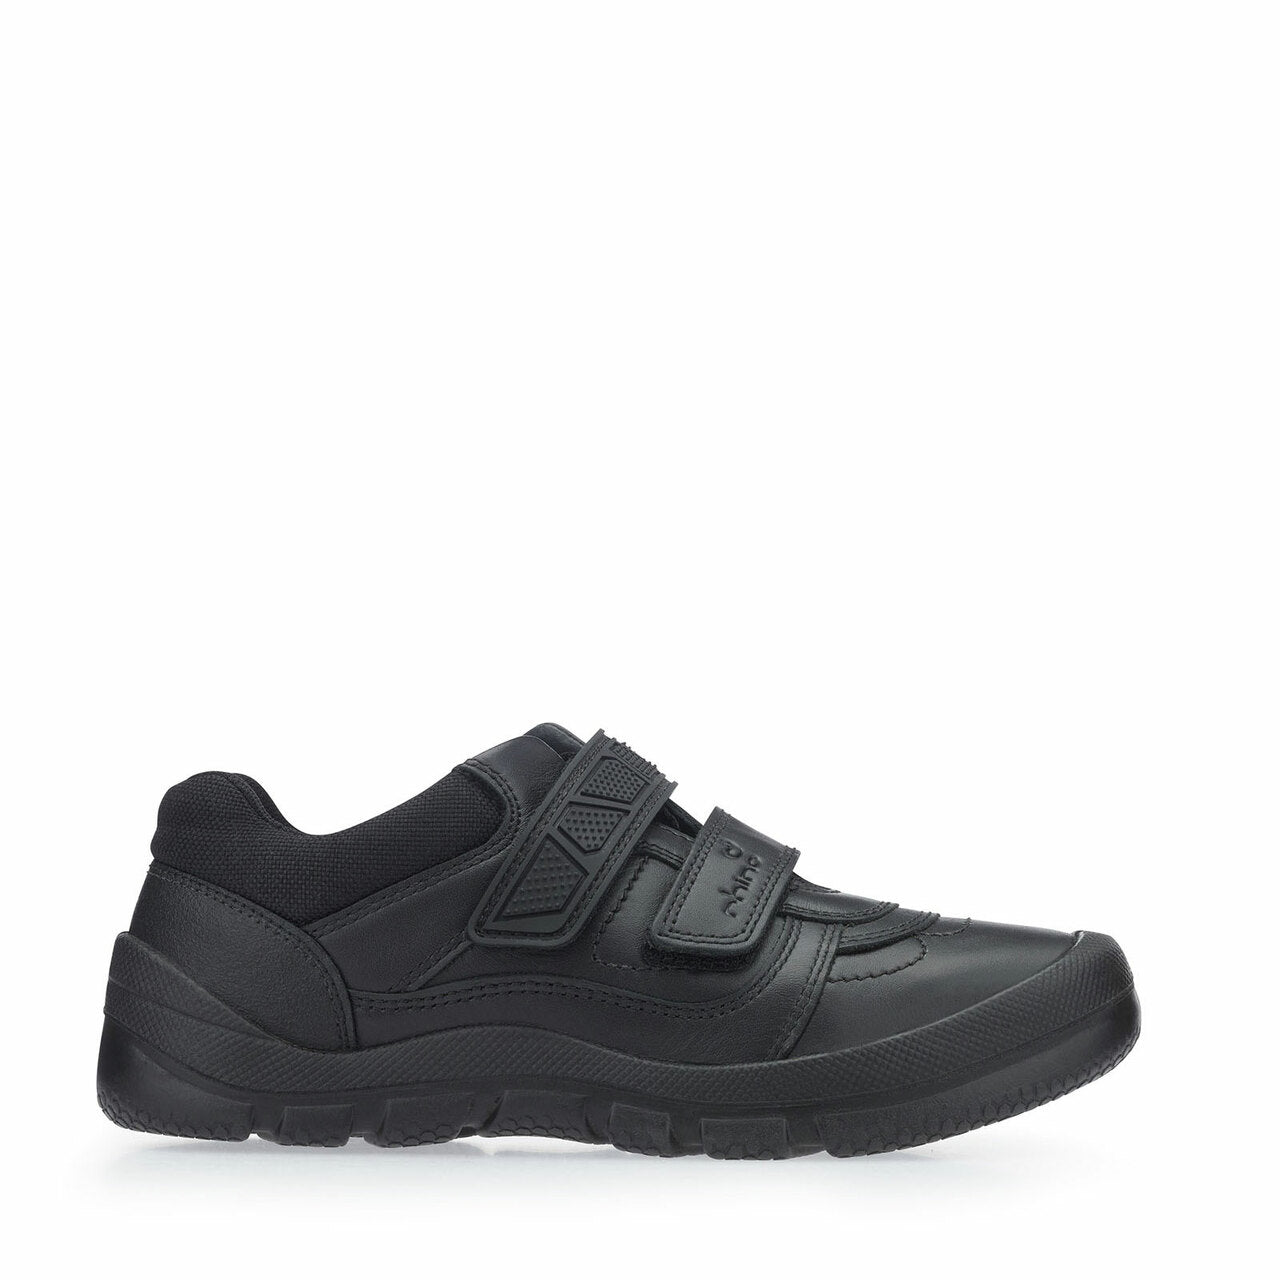 A boys school shoe by Start Rite, style Warrior, in black leather with double velcro fastening. Right side view.